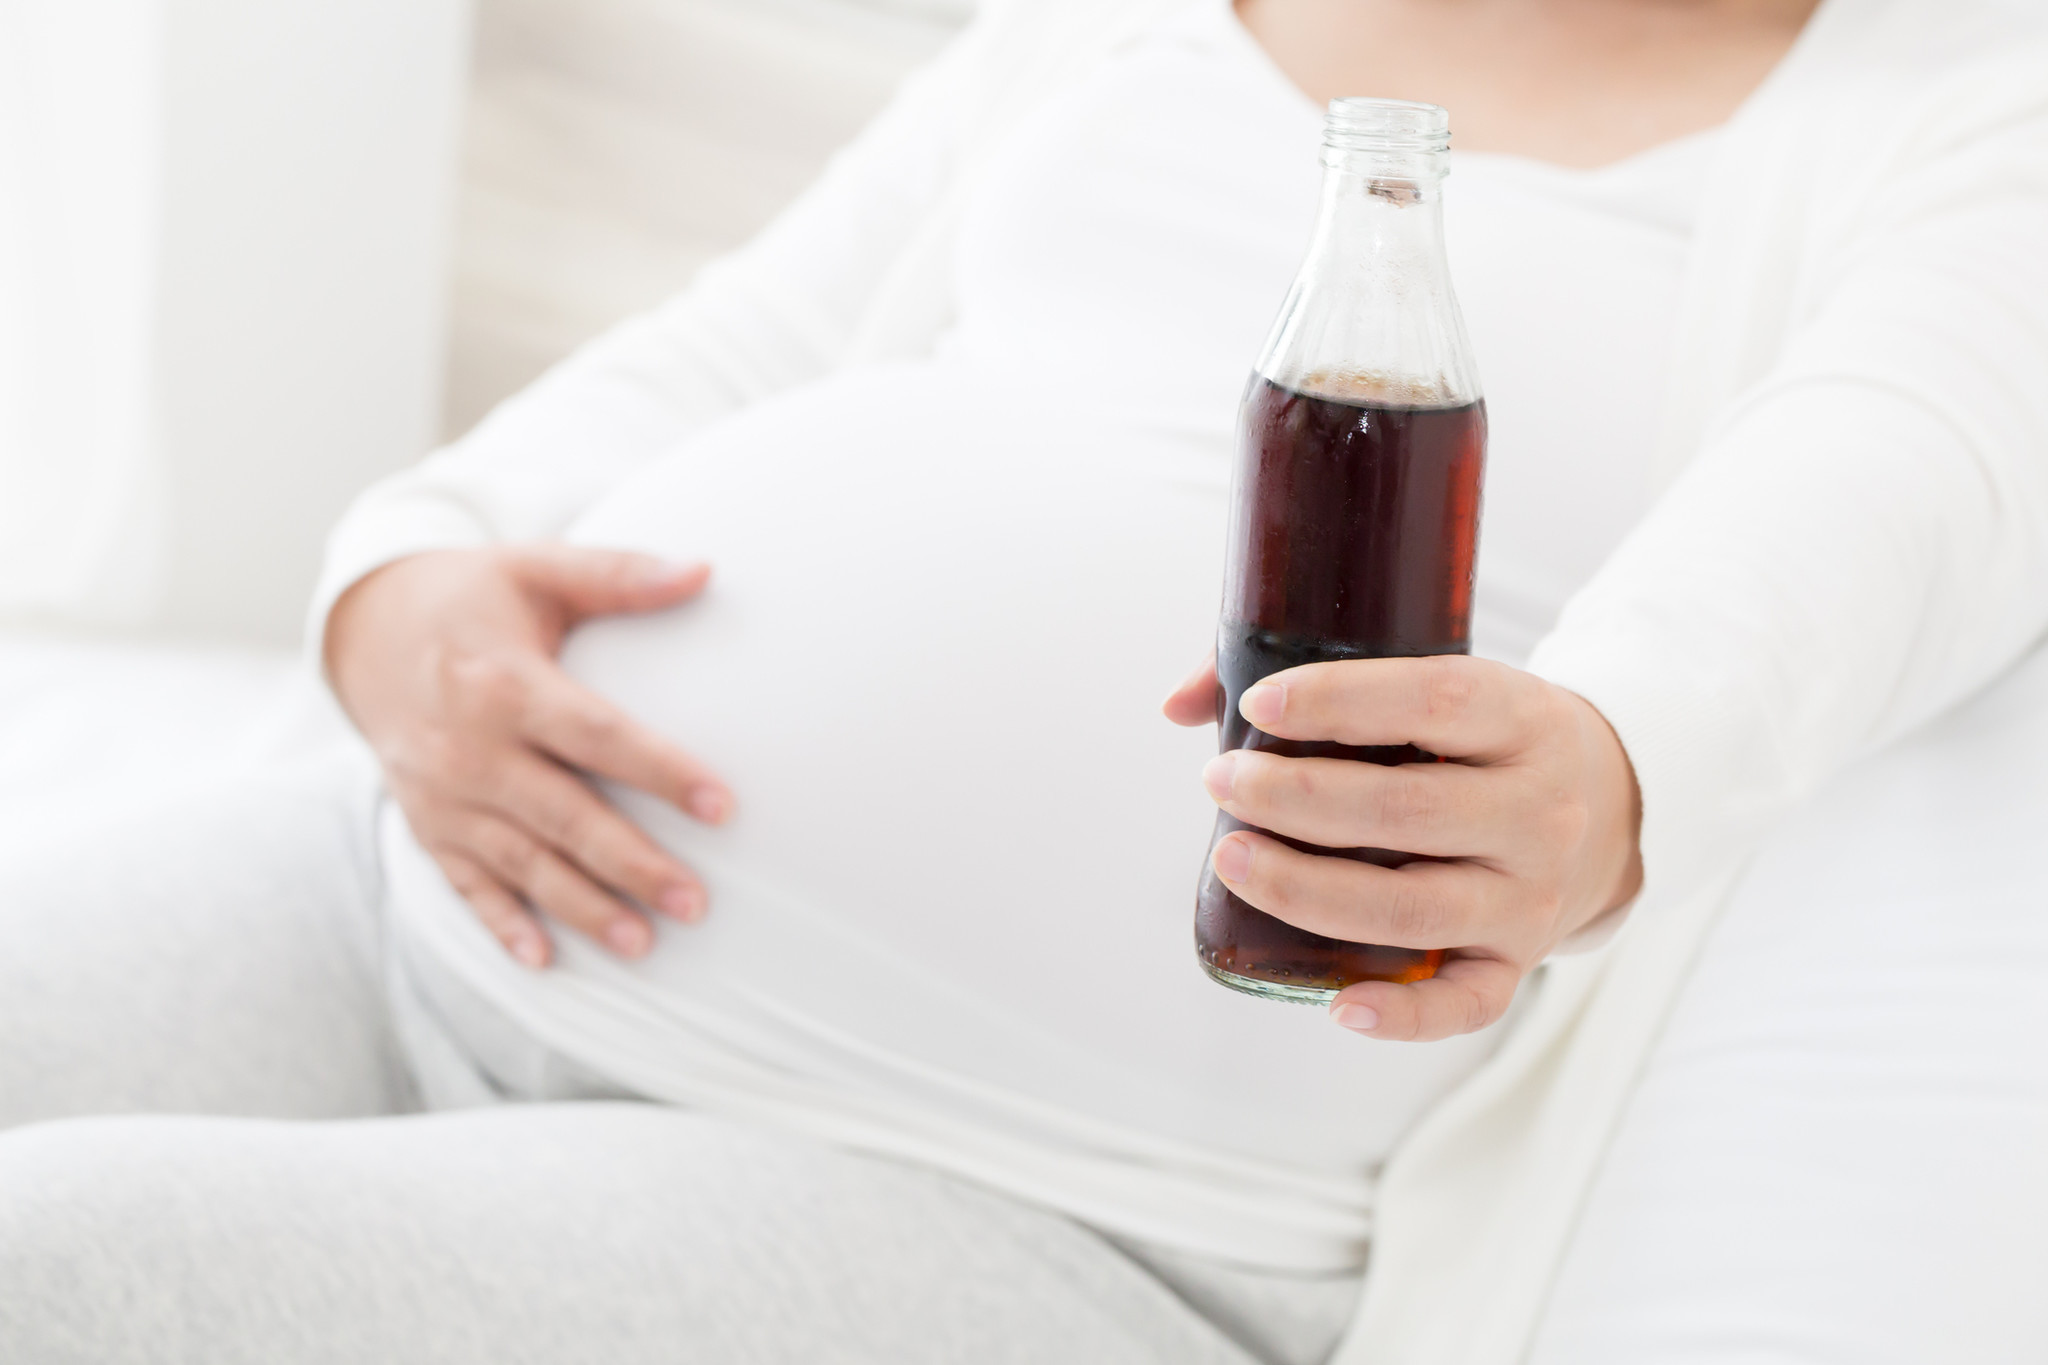 sns-dailymeal-1860461-healthy-eating-drinking-soda-pregnant-child-asthma-risk-study-120817-20171208